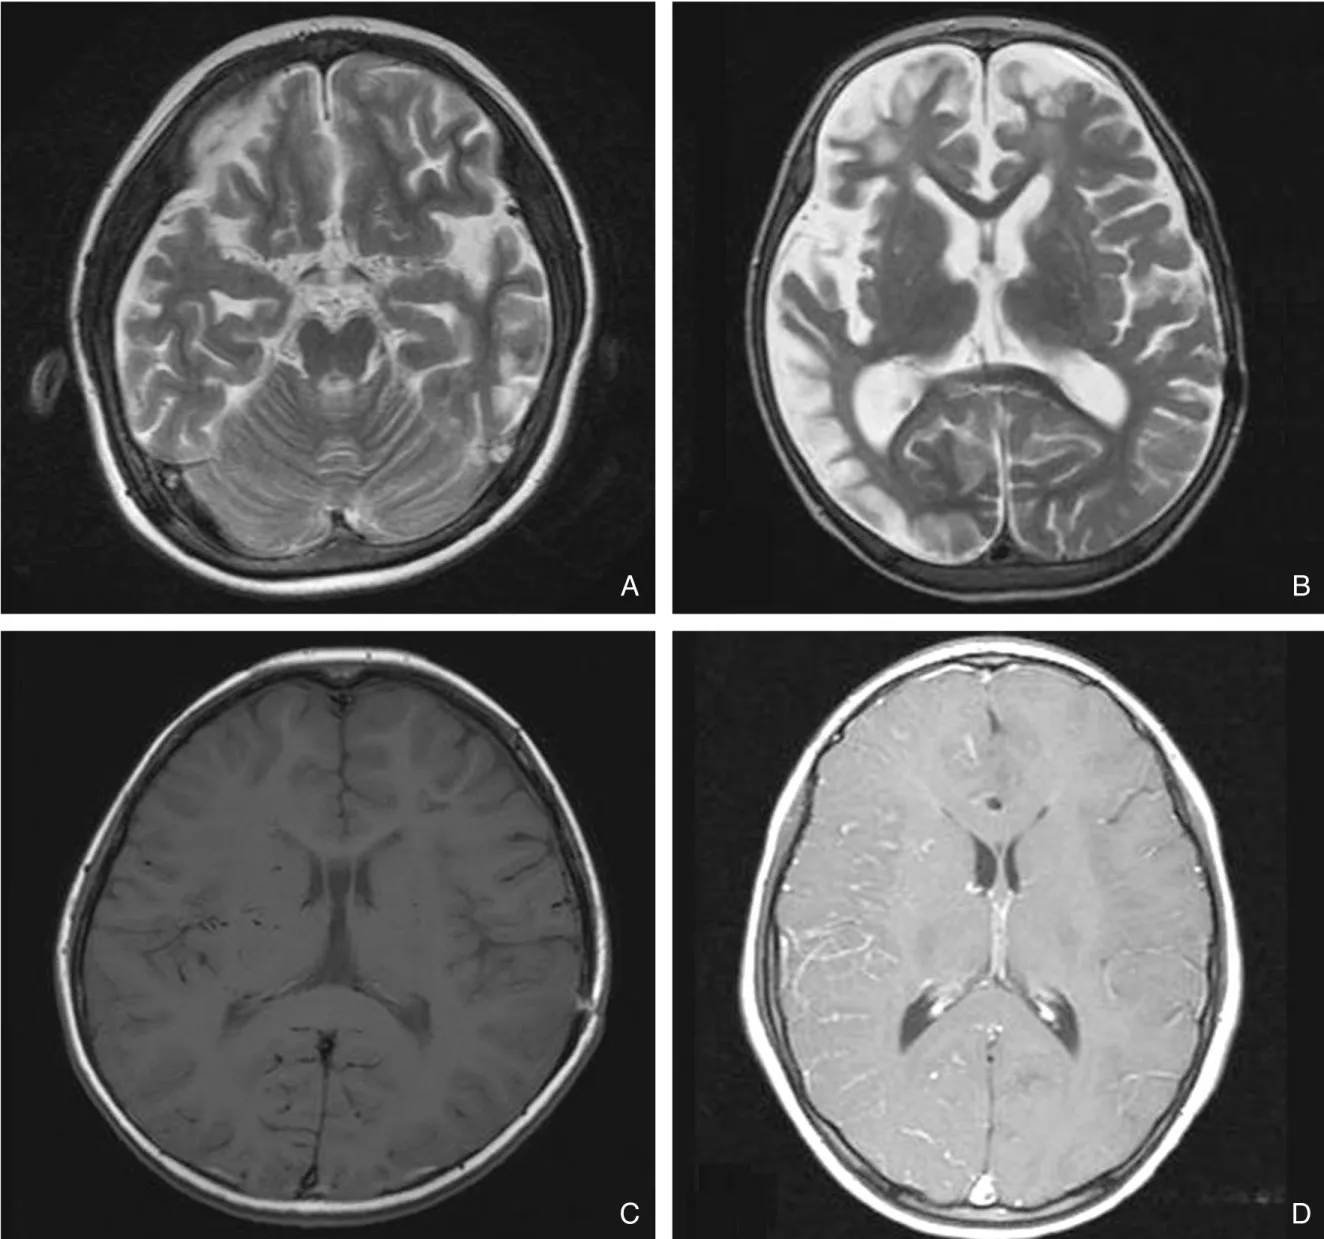 Figure 1. An axial T2 -weighted MR image shows diminished flow voids in the internal carotid and middle cerebral arteries (A) and huge cortical infarction in the right hemisphere and left frontal lobe (B)